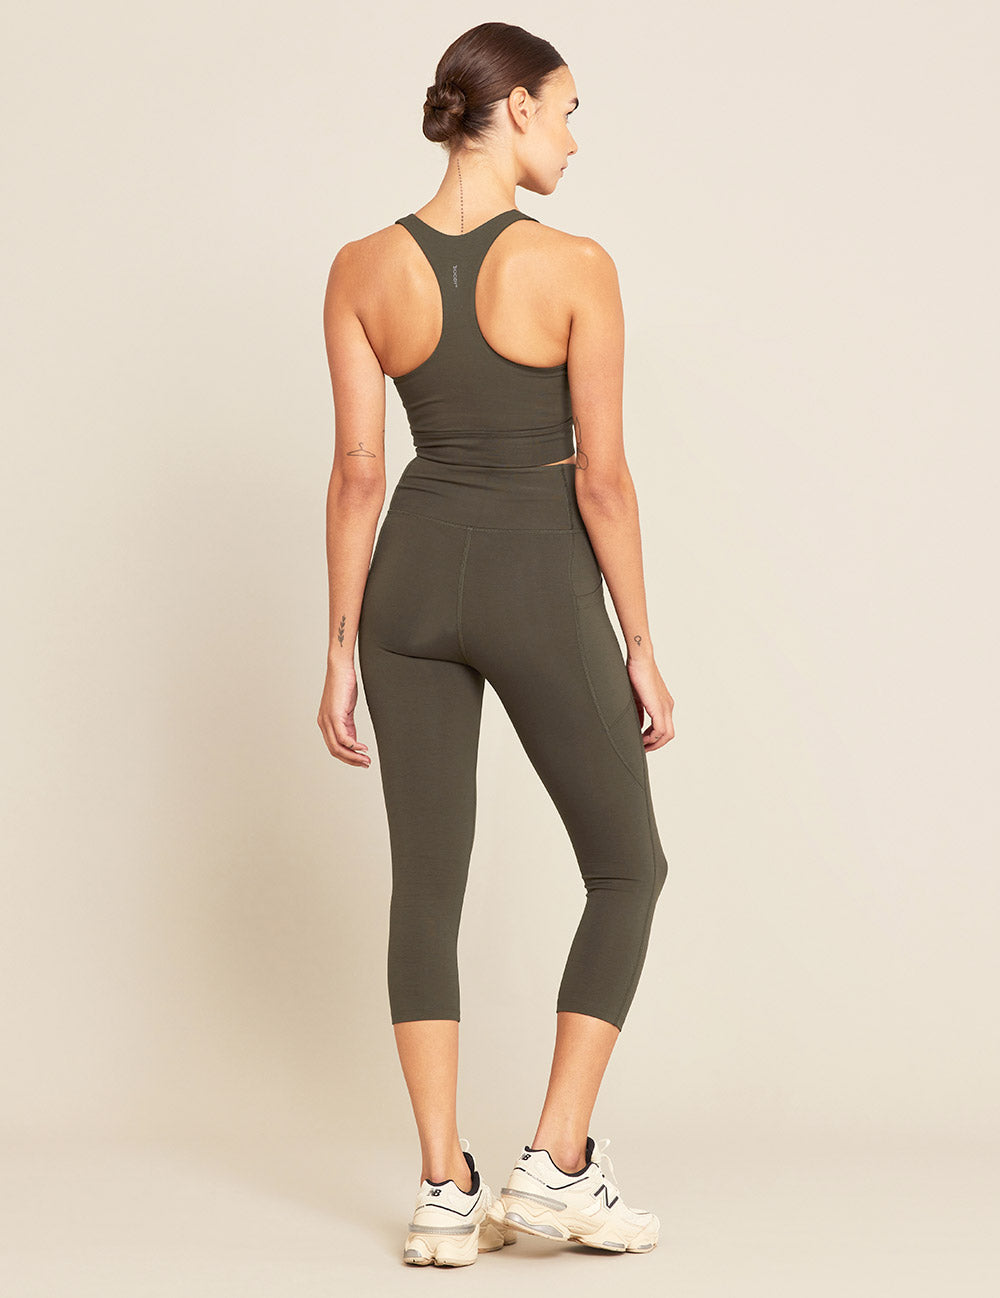 Boody Bamboo Active Blended High Waist 3/4 Legging in Dark Olive Back View